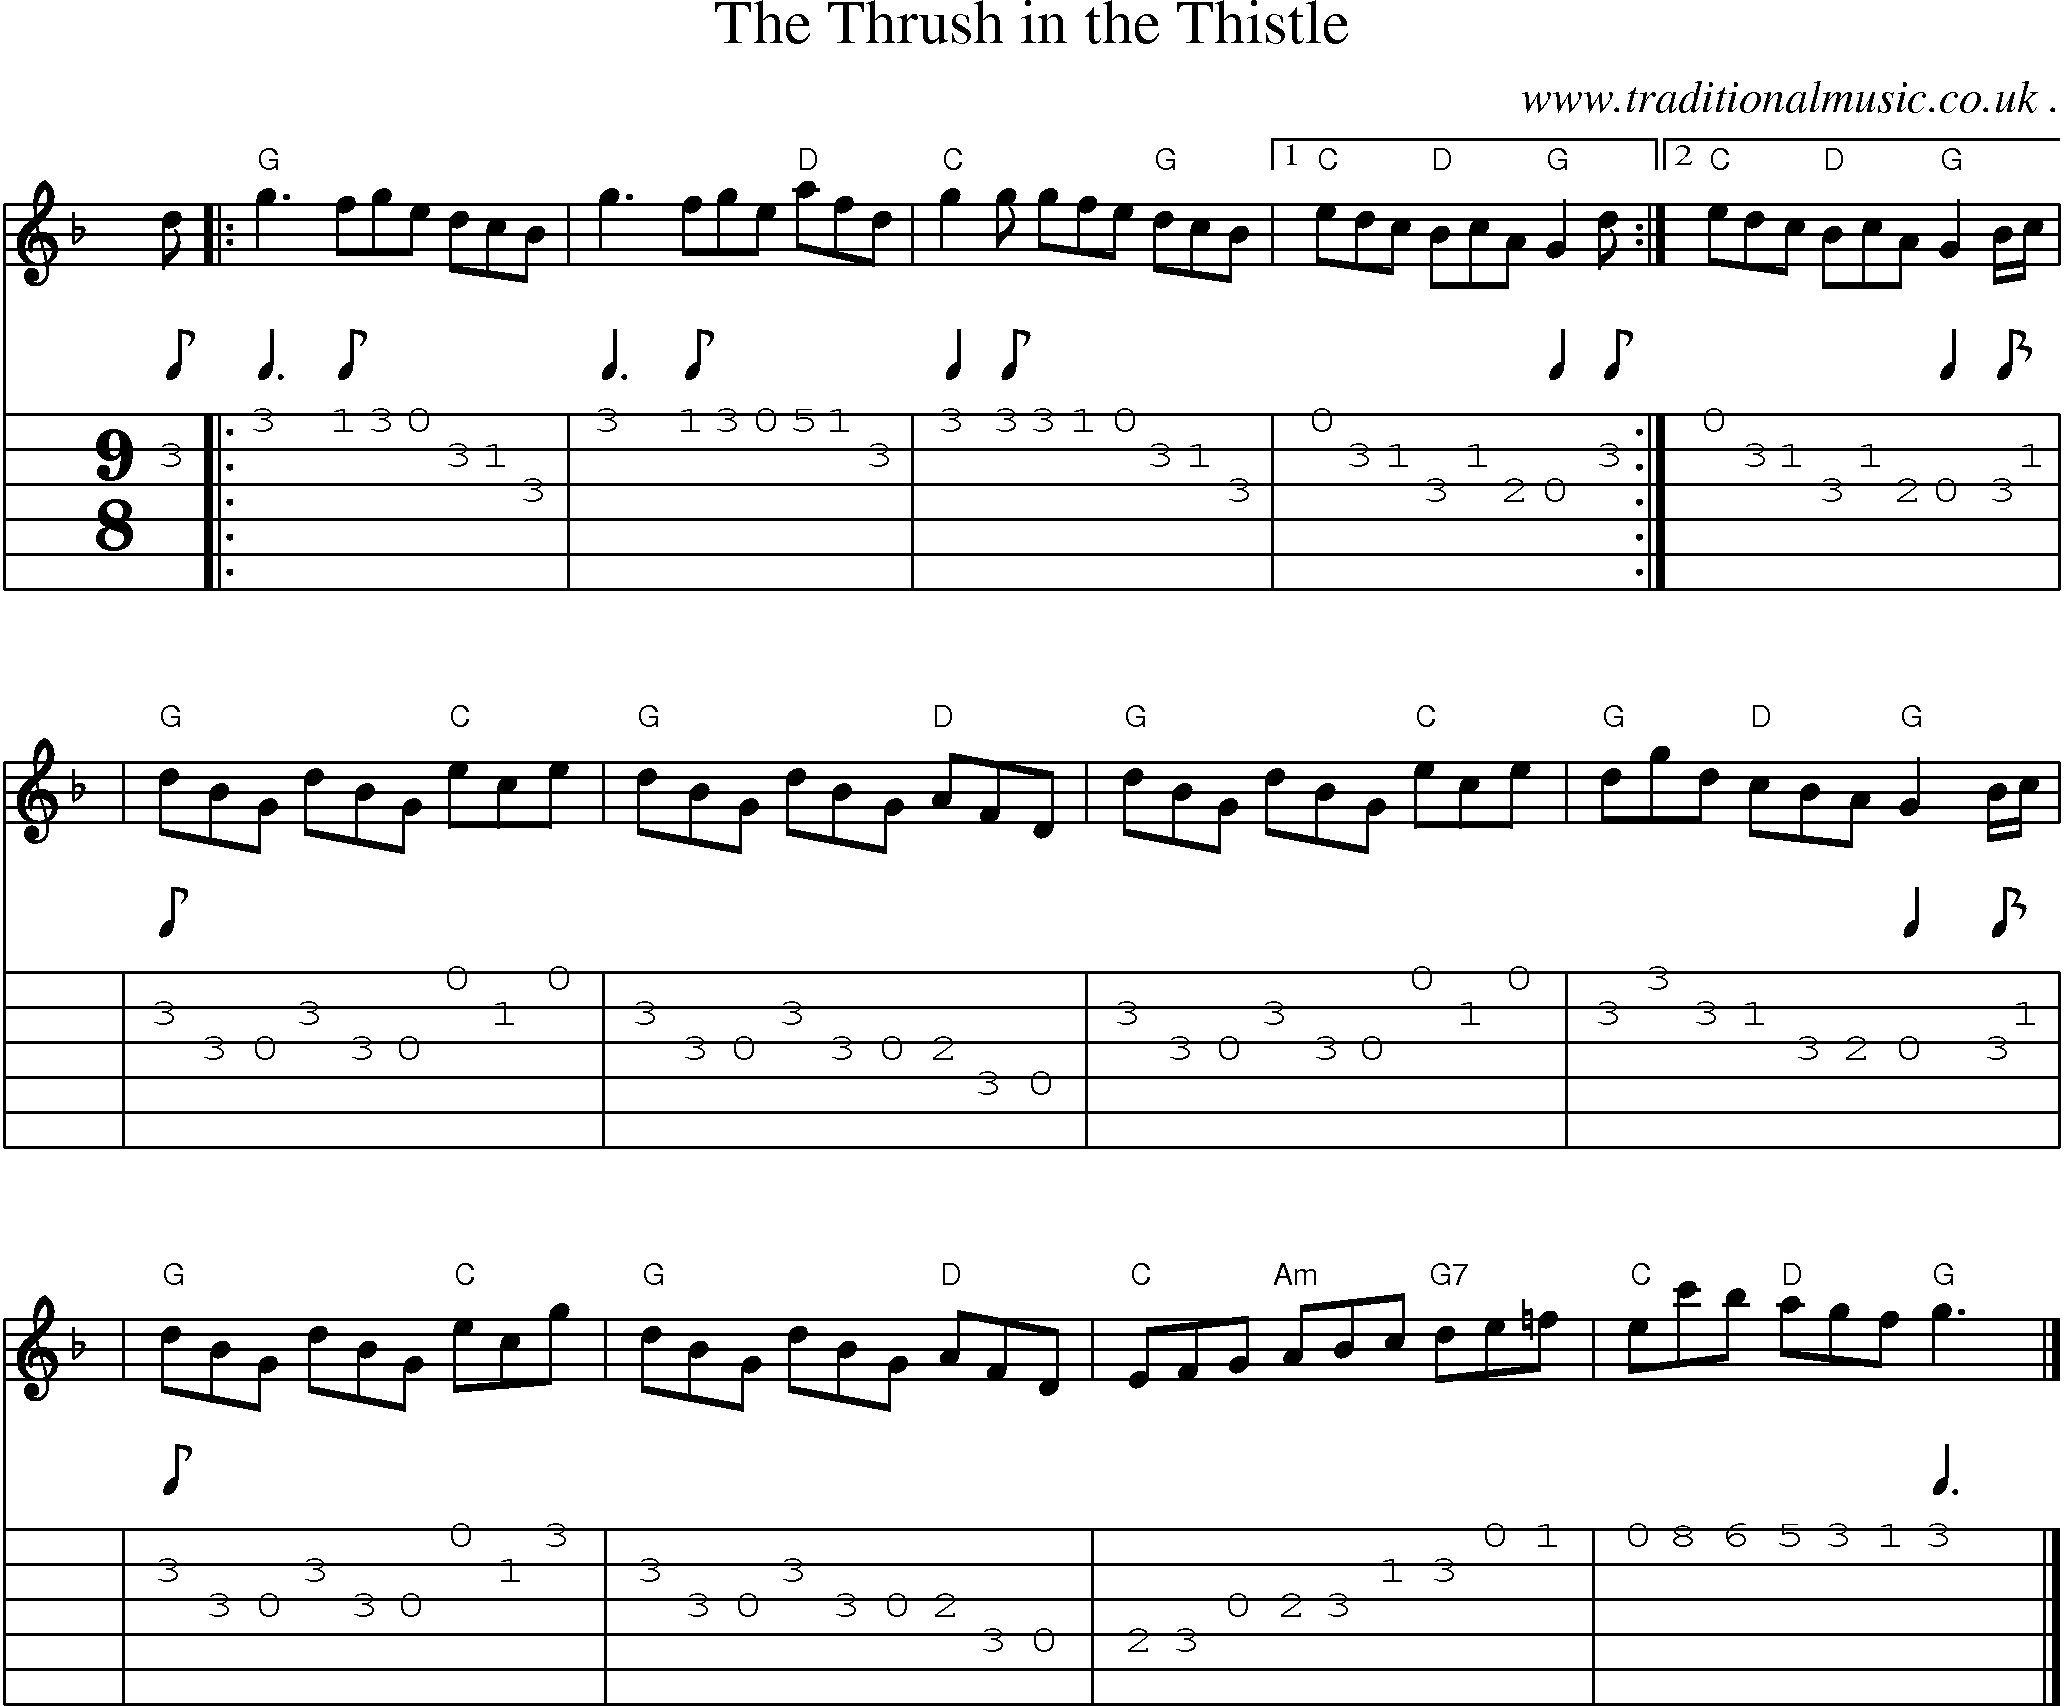 Sheet-music  score, Chords and Guitar Tabs for The Thrush In The Thistle